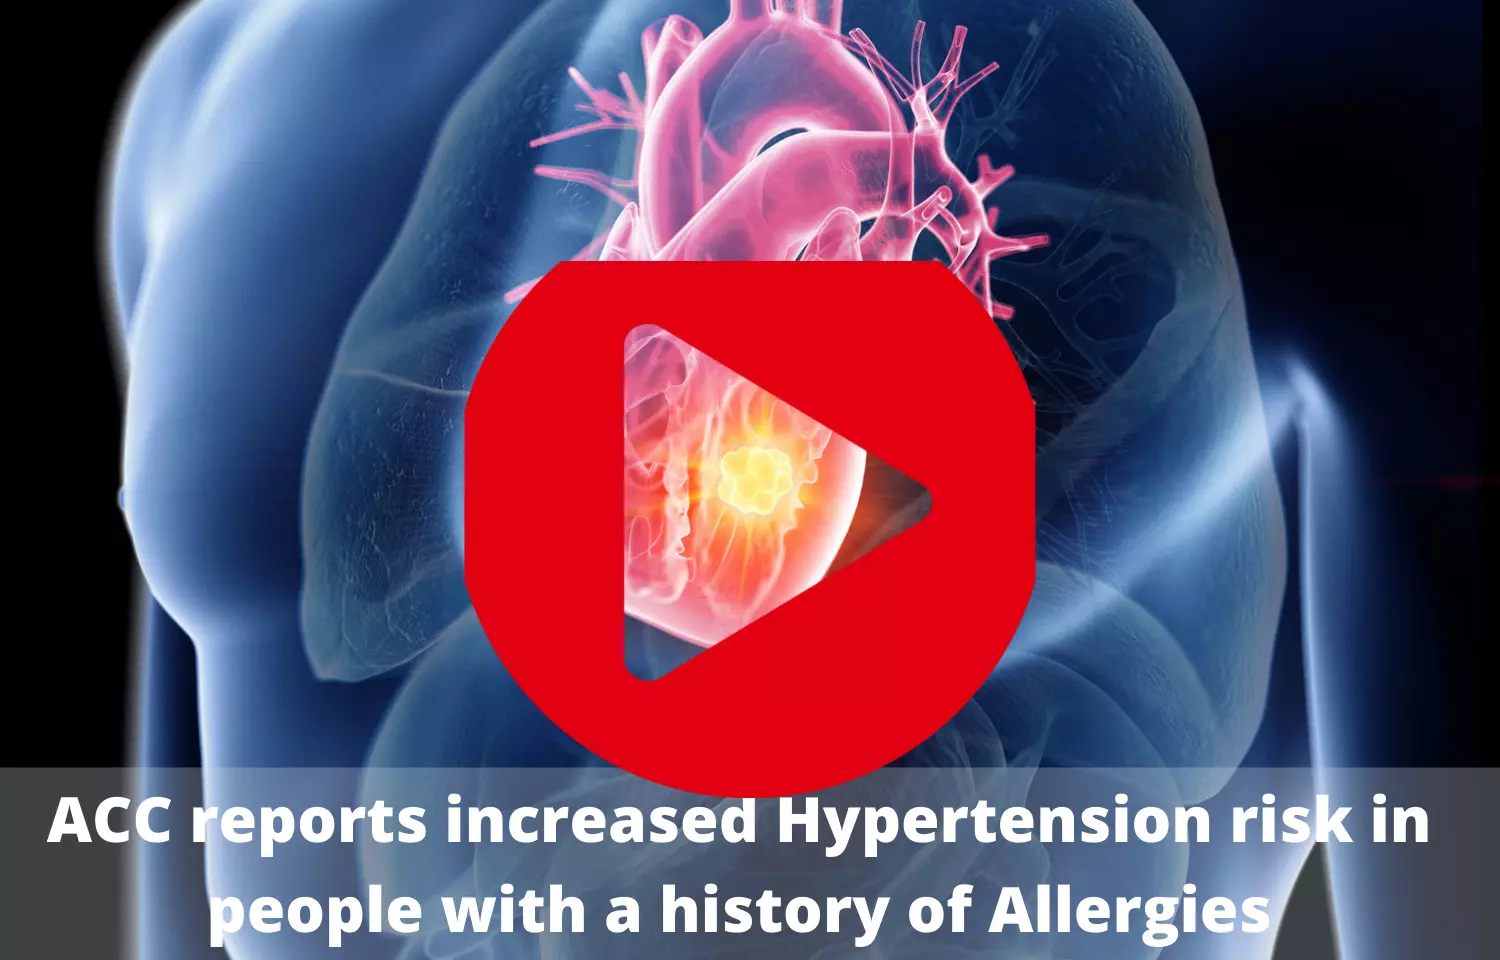 Journal Club - ACC reports increased hypertension risk in people with history of allergies